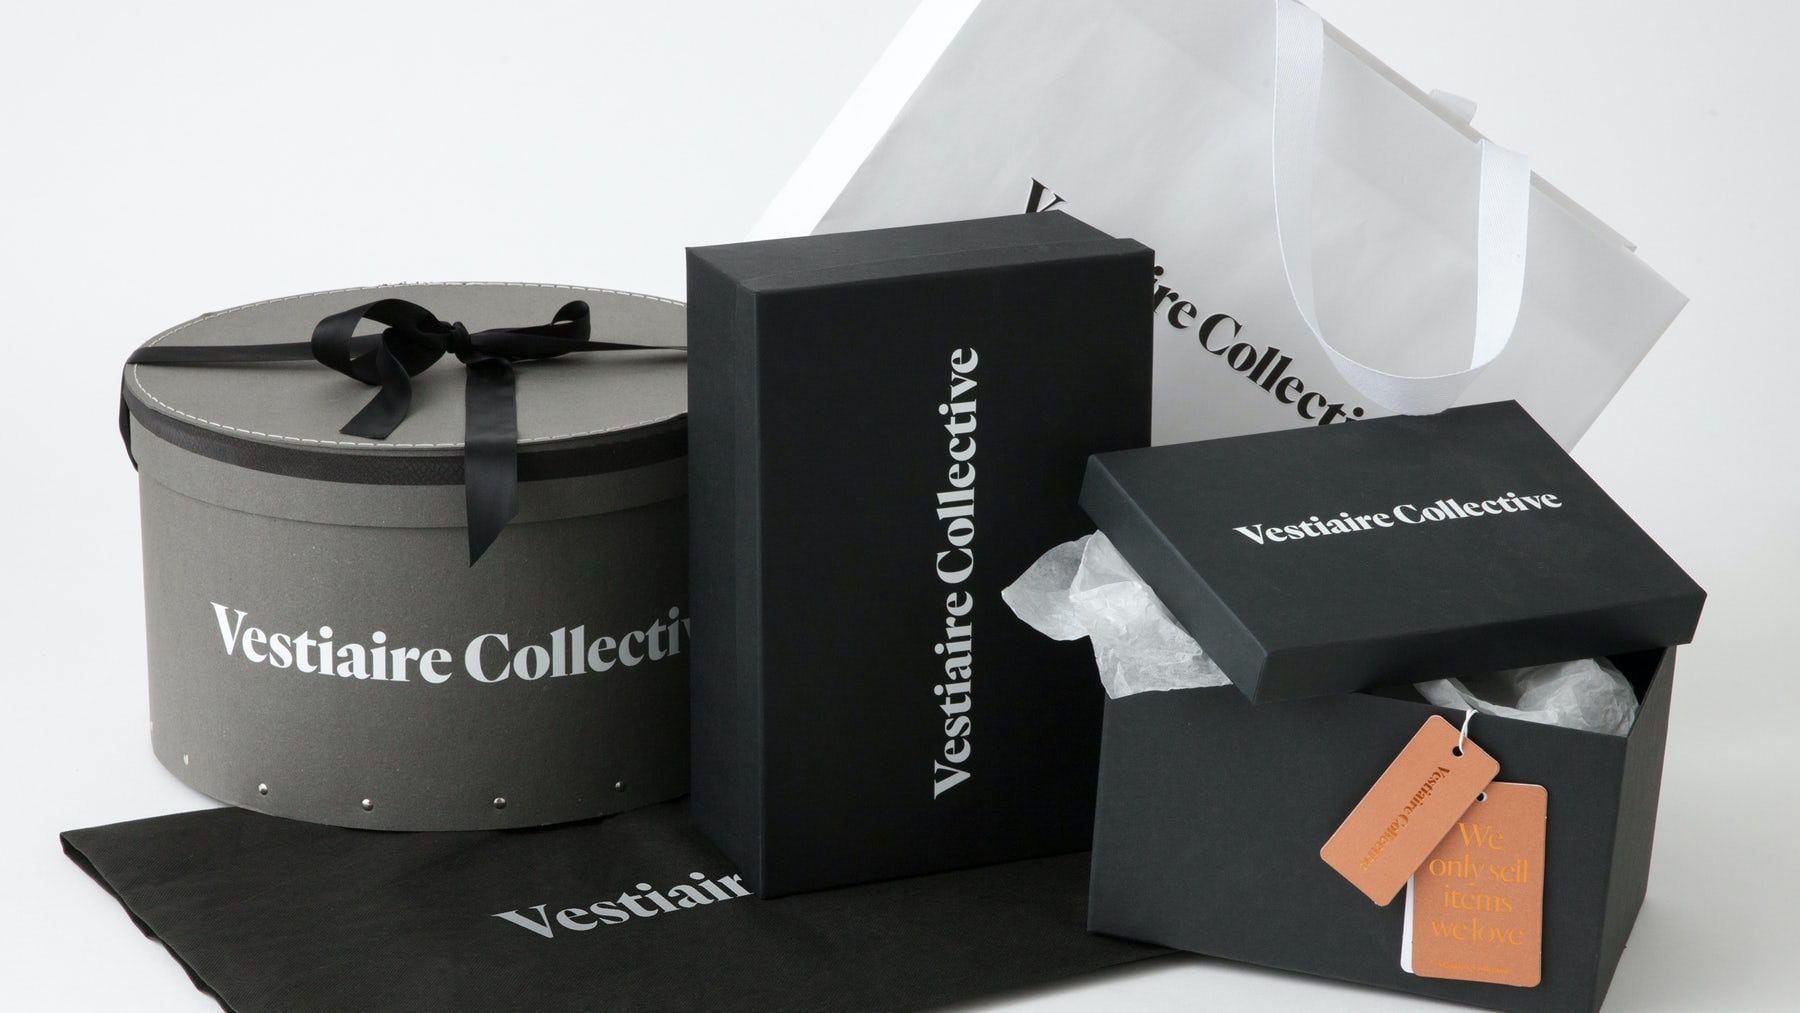 Vestiaire Collective Launches Crowdfunding, Eyes IPO in 2025